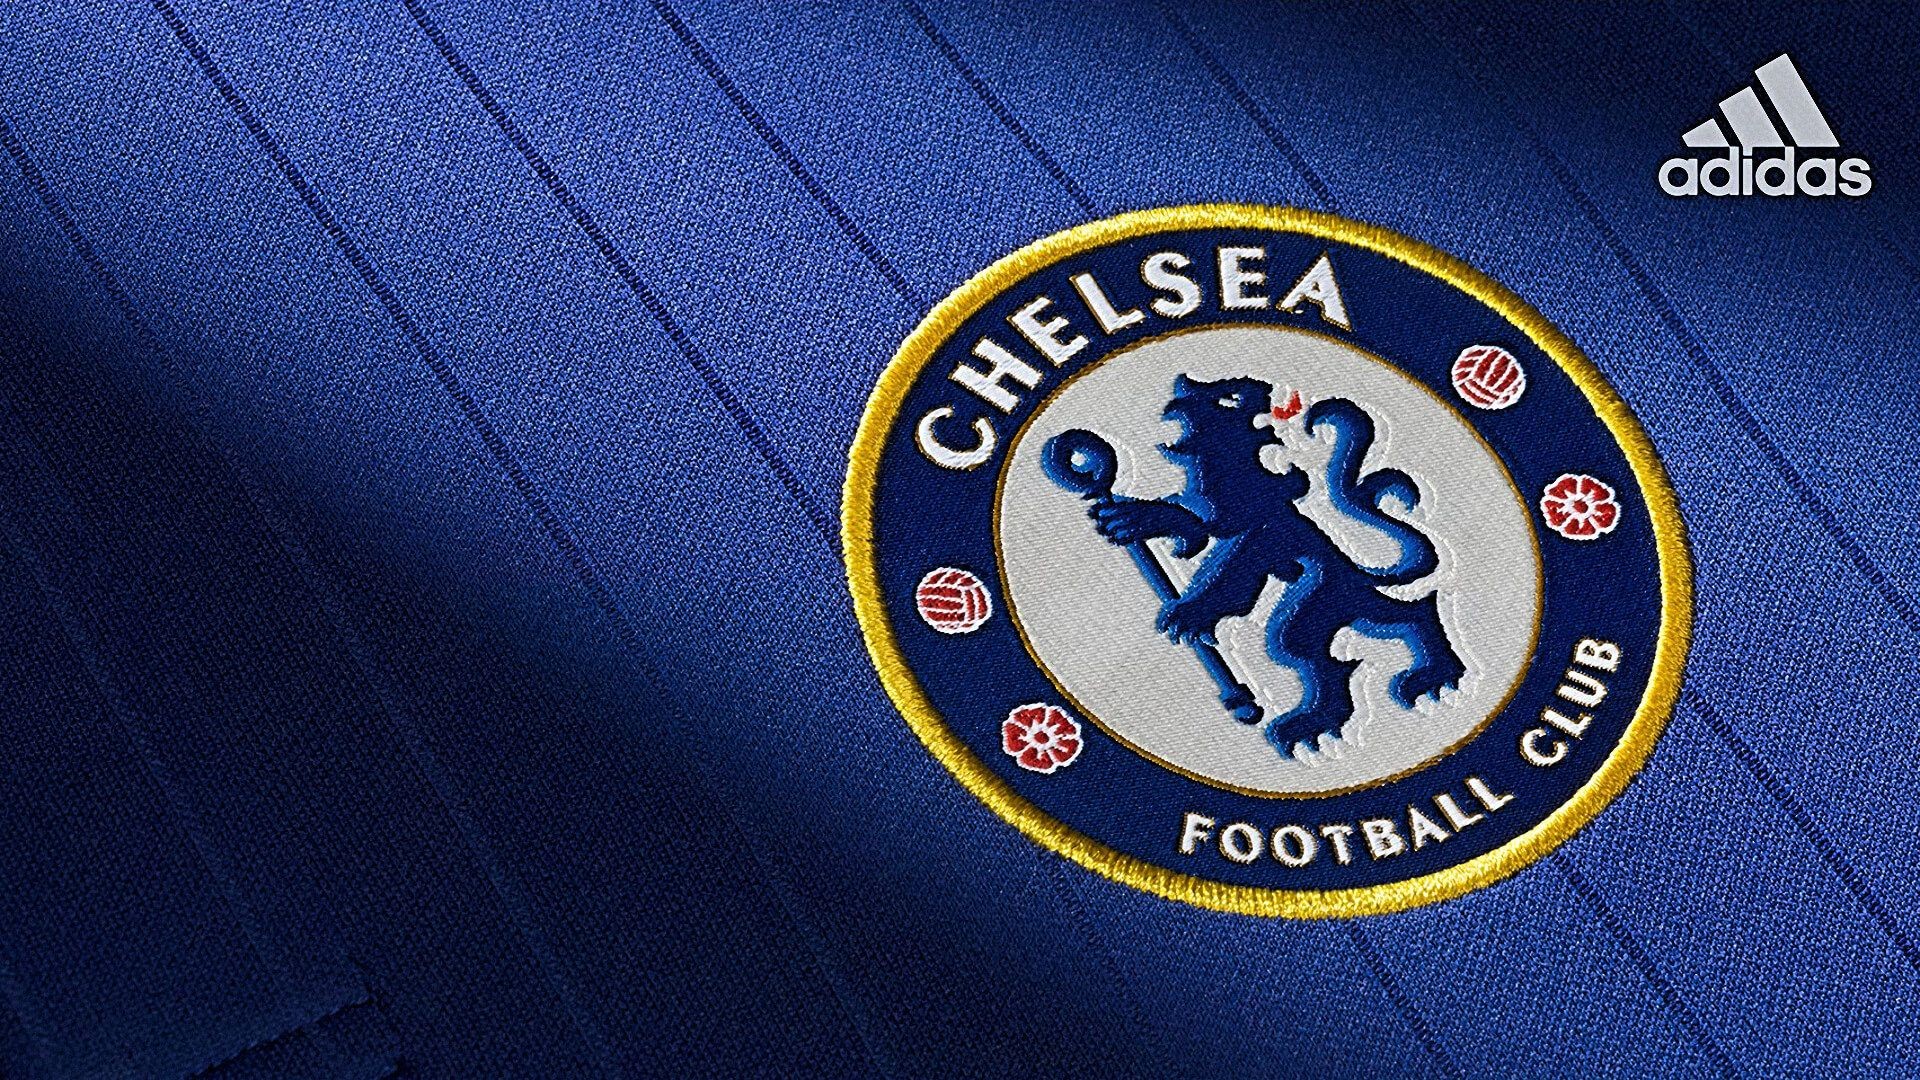 1920x1080 Chelsea Wallpaper Collection For Free Download | HD Wallpapers | Pinterest  | Chelsea, Wallpaper and Hd wallpaper